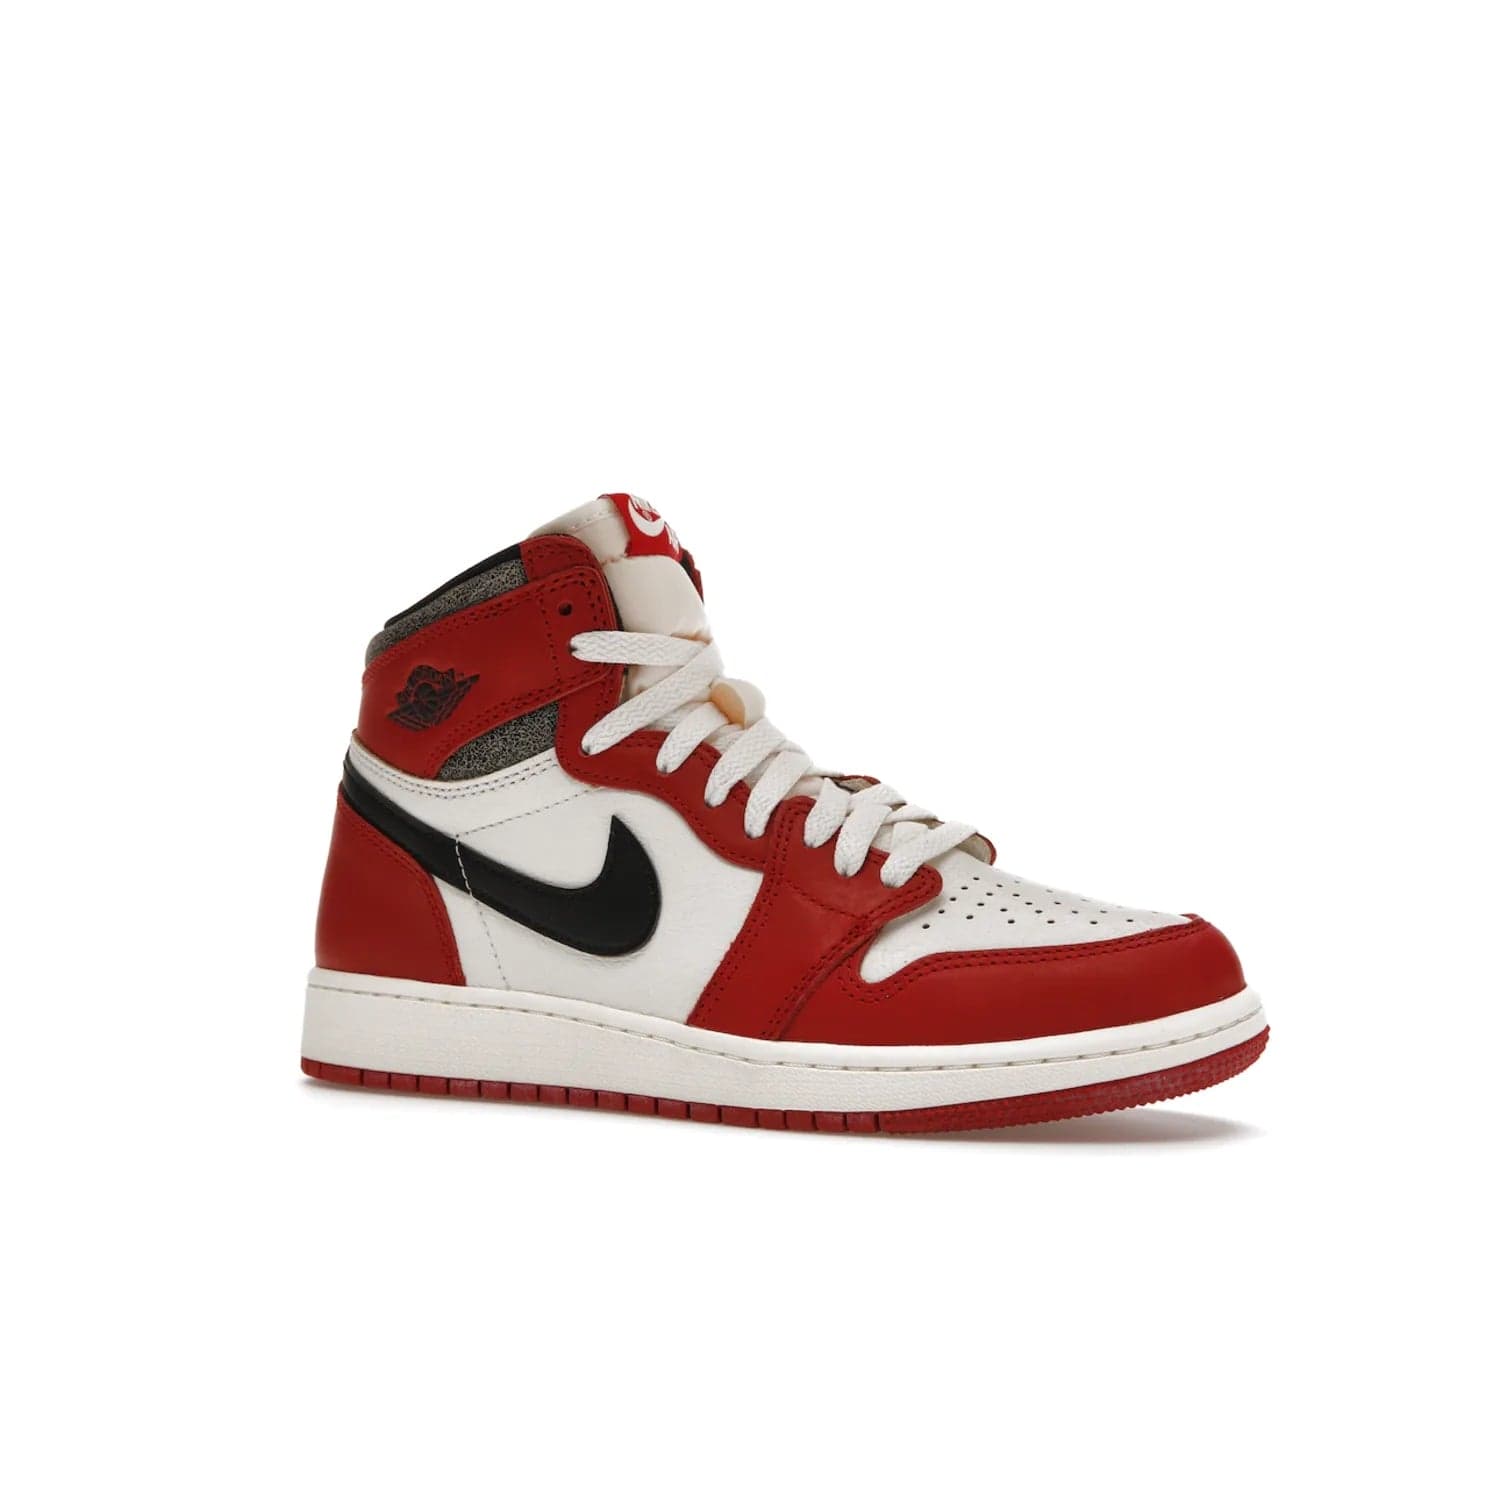 Jordan 1 Retro High OG Chicago Lost and Found (GS) - Image 4 - Only at www.BallersClubKickz.com - Grab the Air Jordan 1 Retro High OG Chicago Reimagined GS, presenting in classic 1985 silhouette. Varsity Red, Black, Muslin and Sail hues, featuring Nike Air branding, Wings on the collars and printed insoles. Don't miss out when it releases 19th Nov 2022.